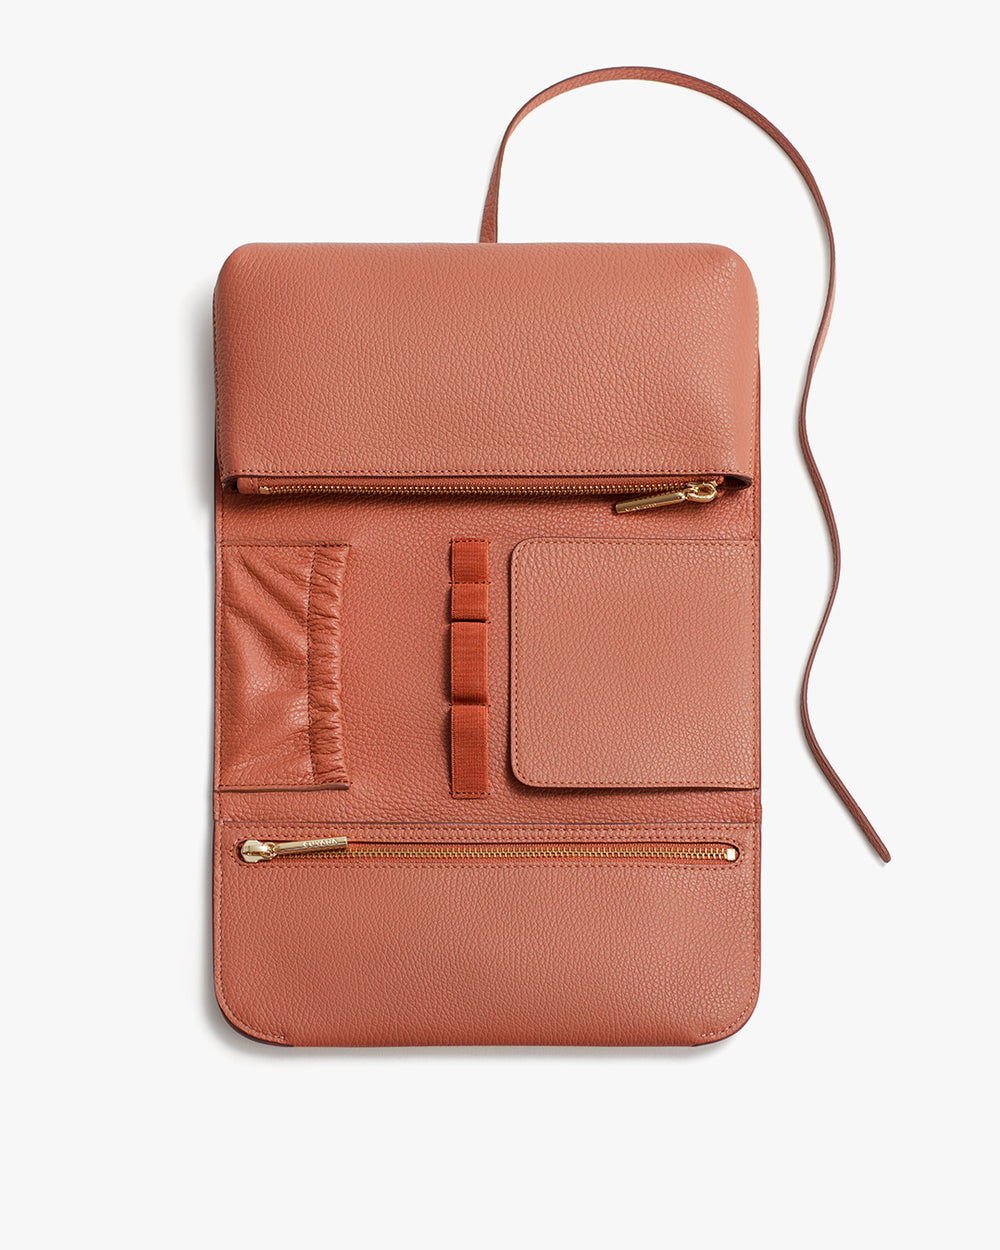 Leather crossbody bag with multiple pockets and a long strap.